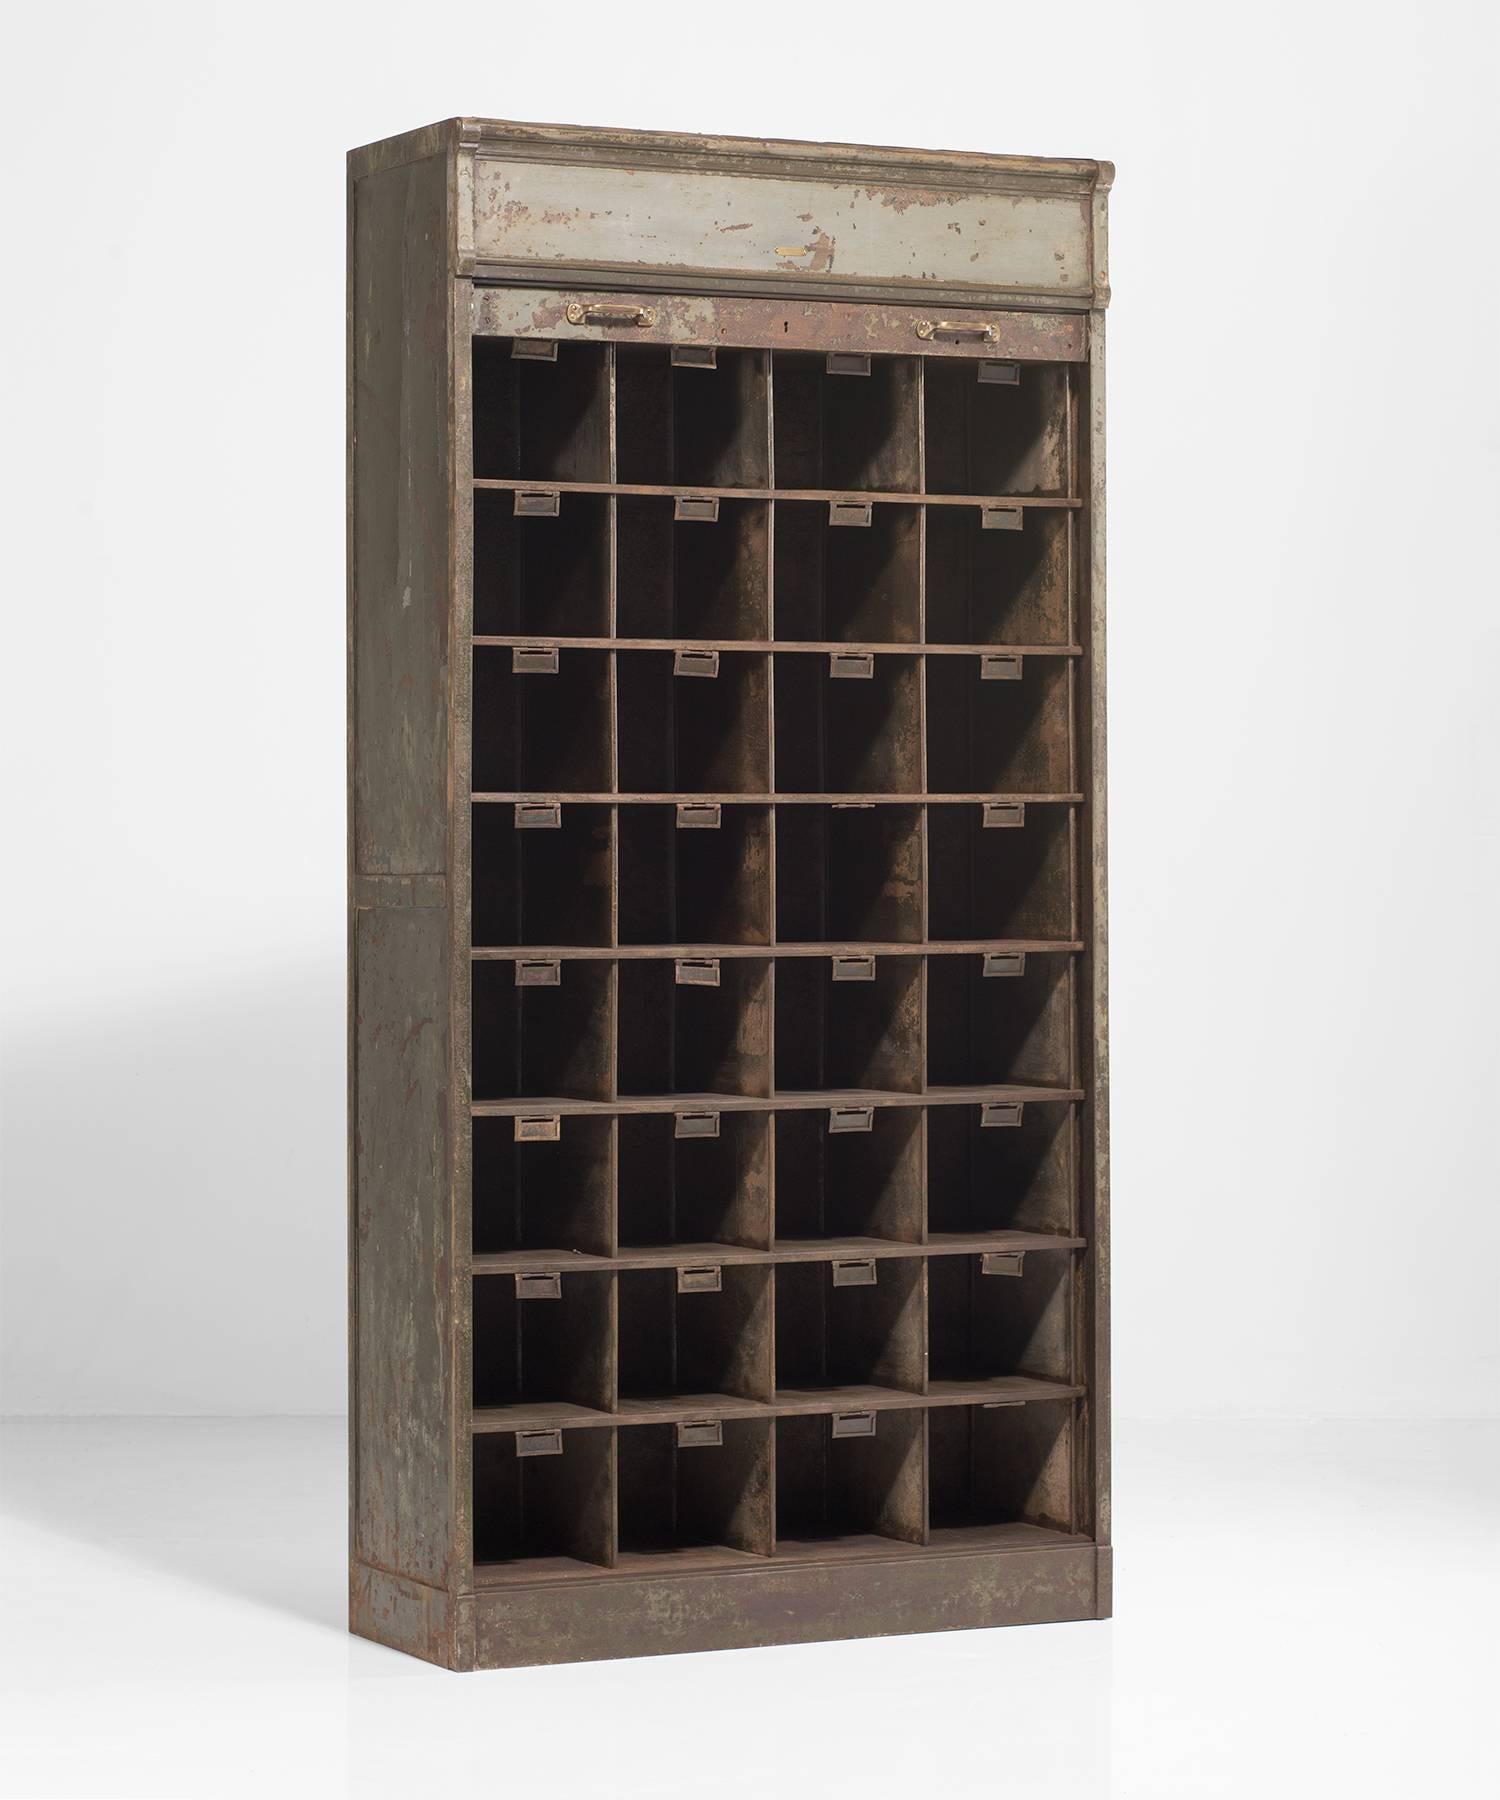 Painted Industrial Roller Cabinet by Strafers, circa 1930